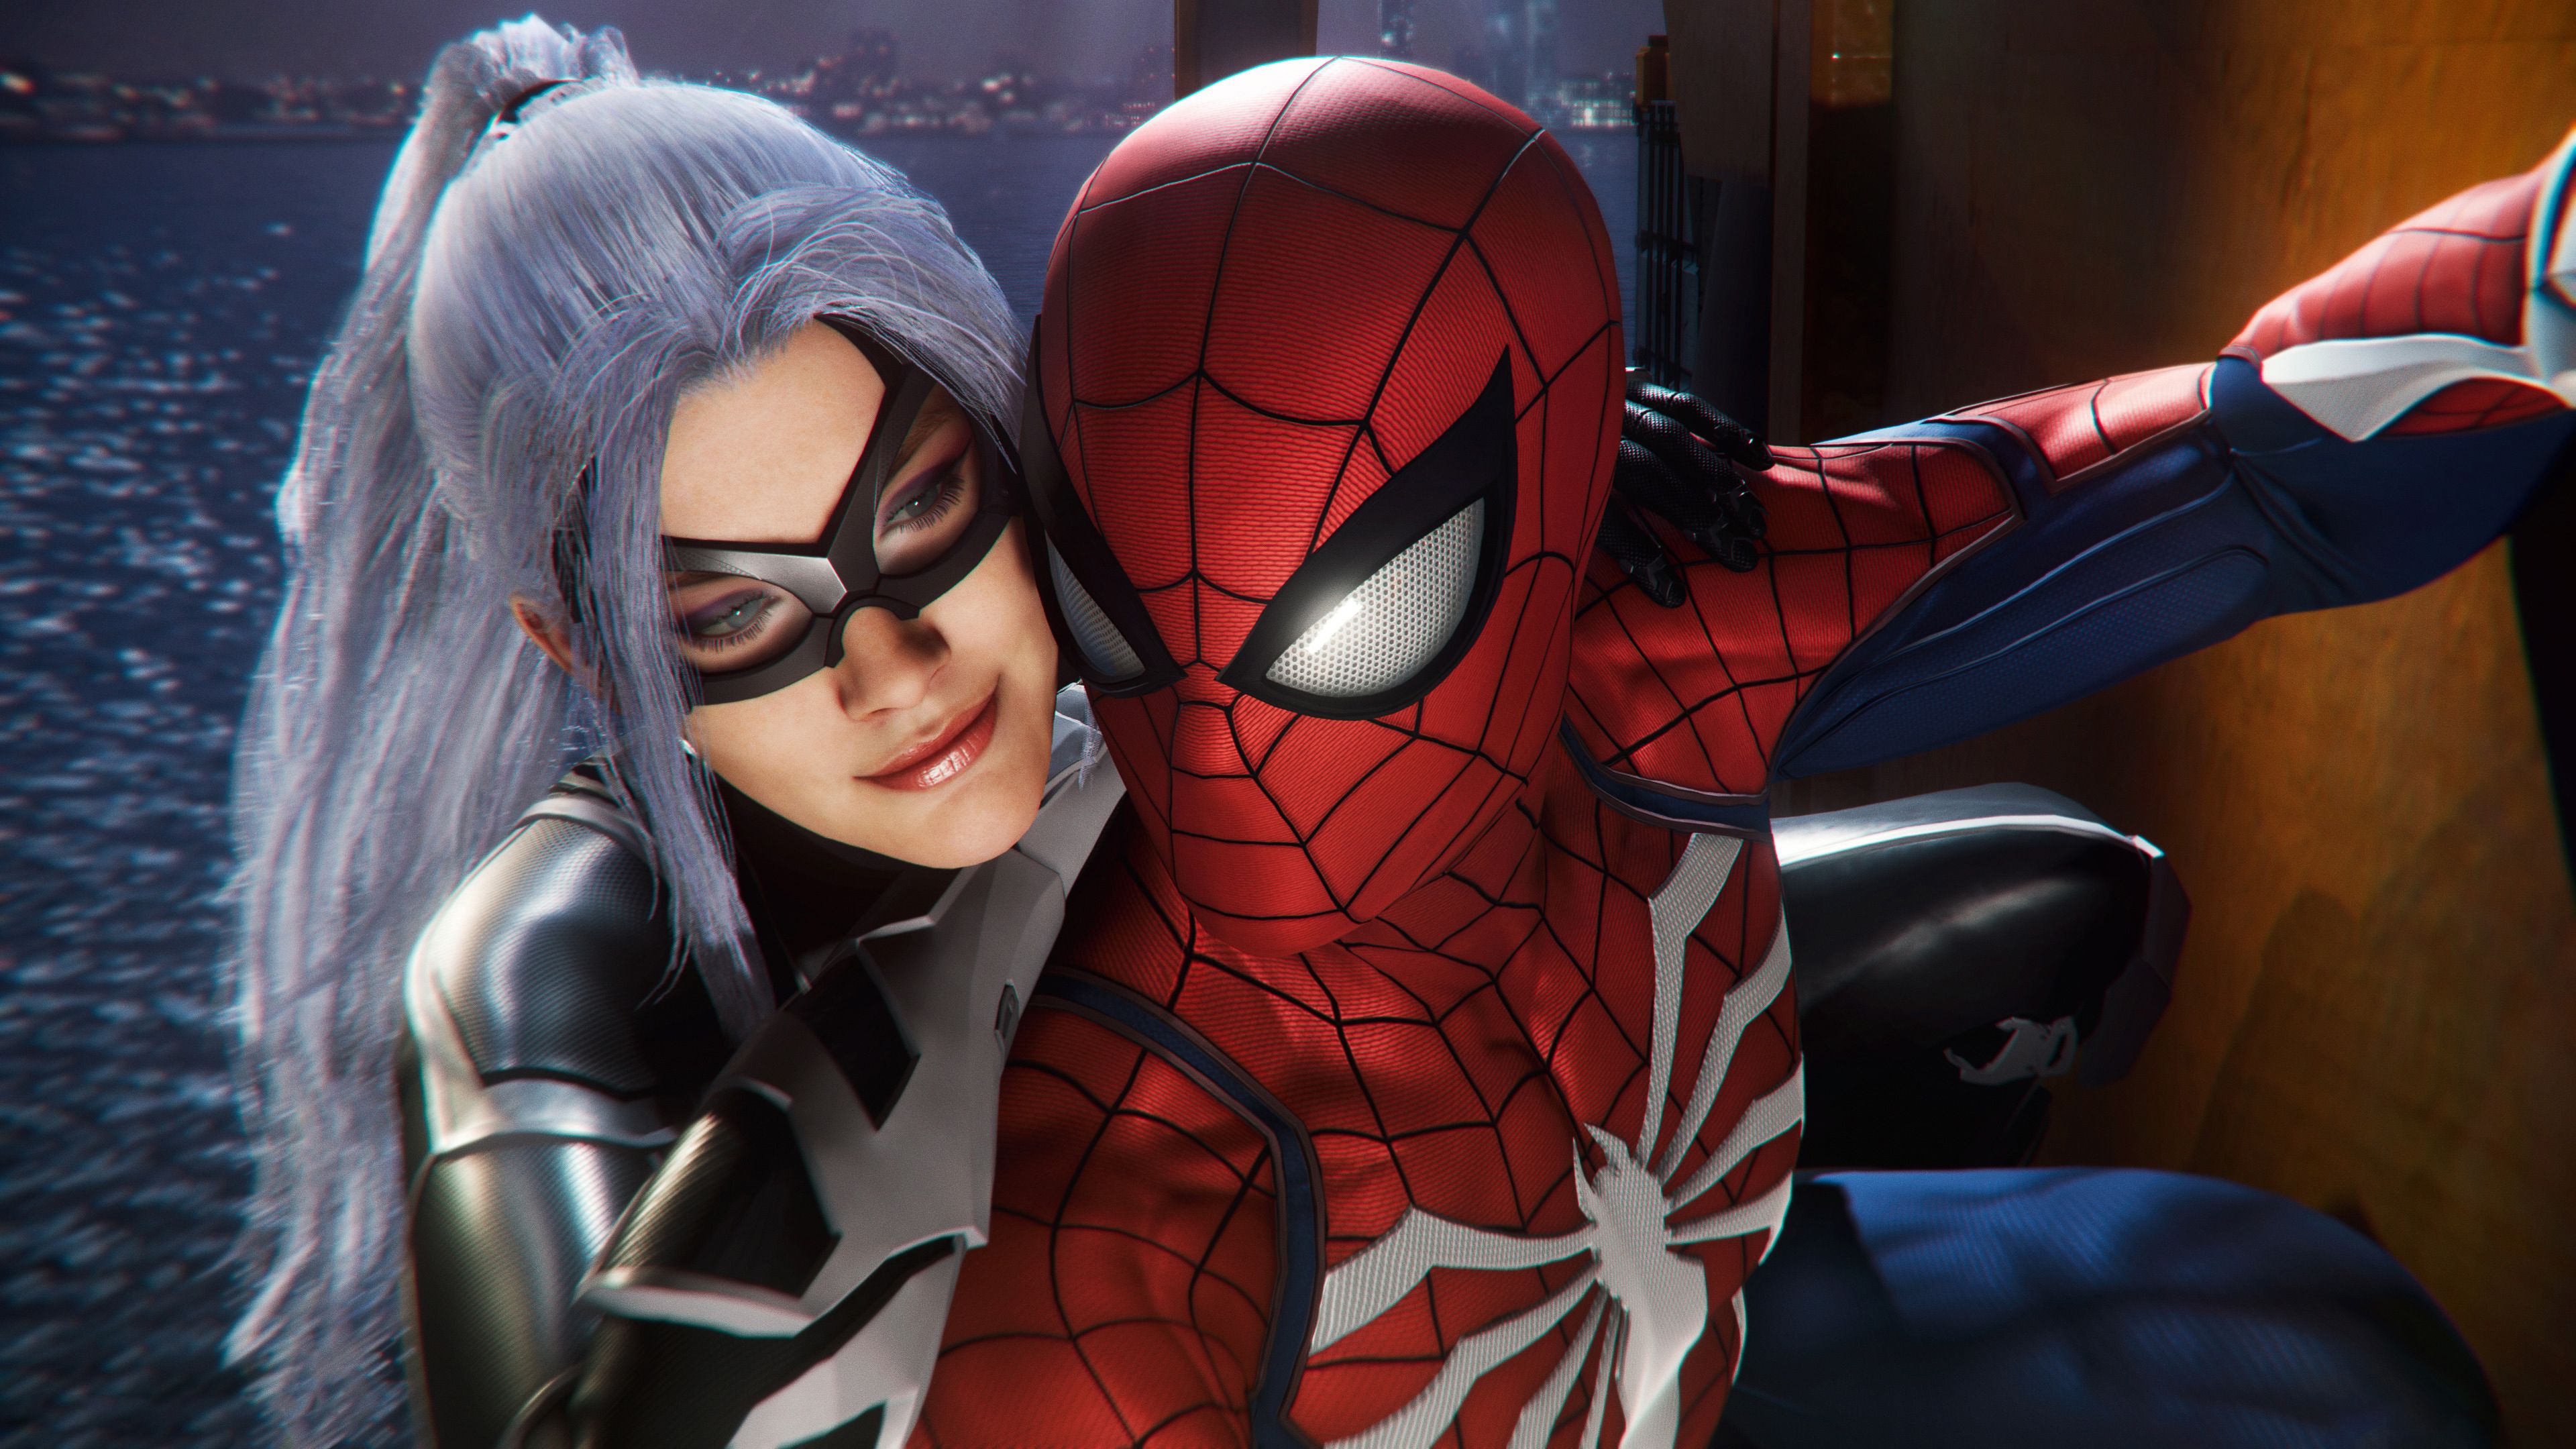 Spiderman And Felicia Hardy In Spiderman Ps HD Games, 4k